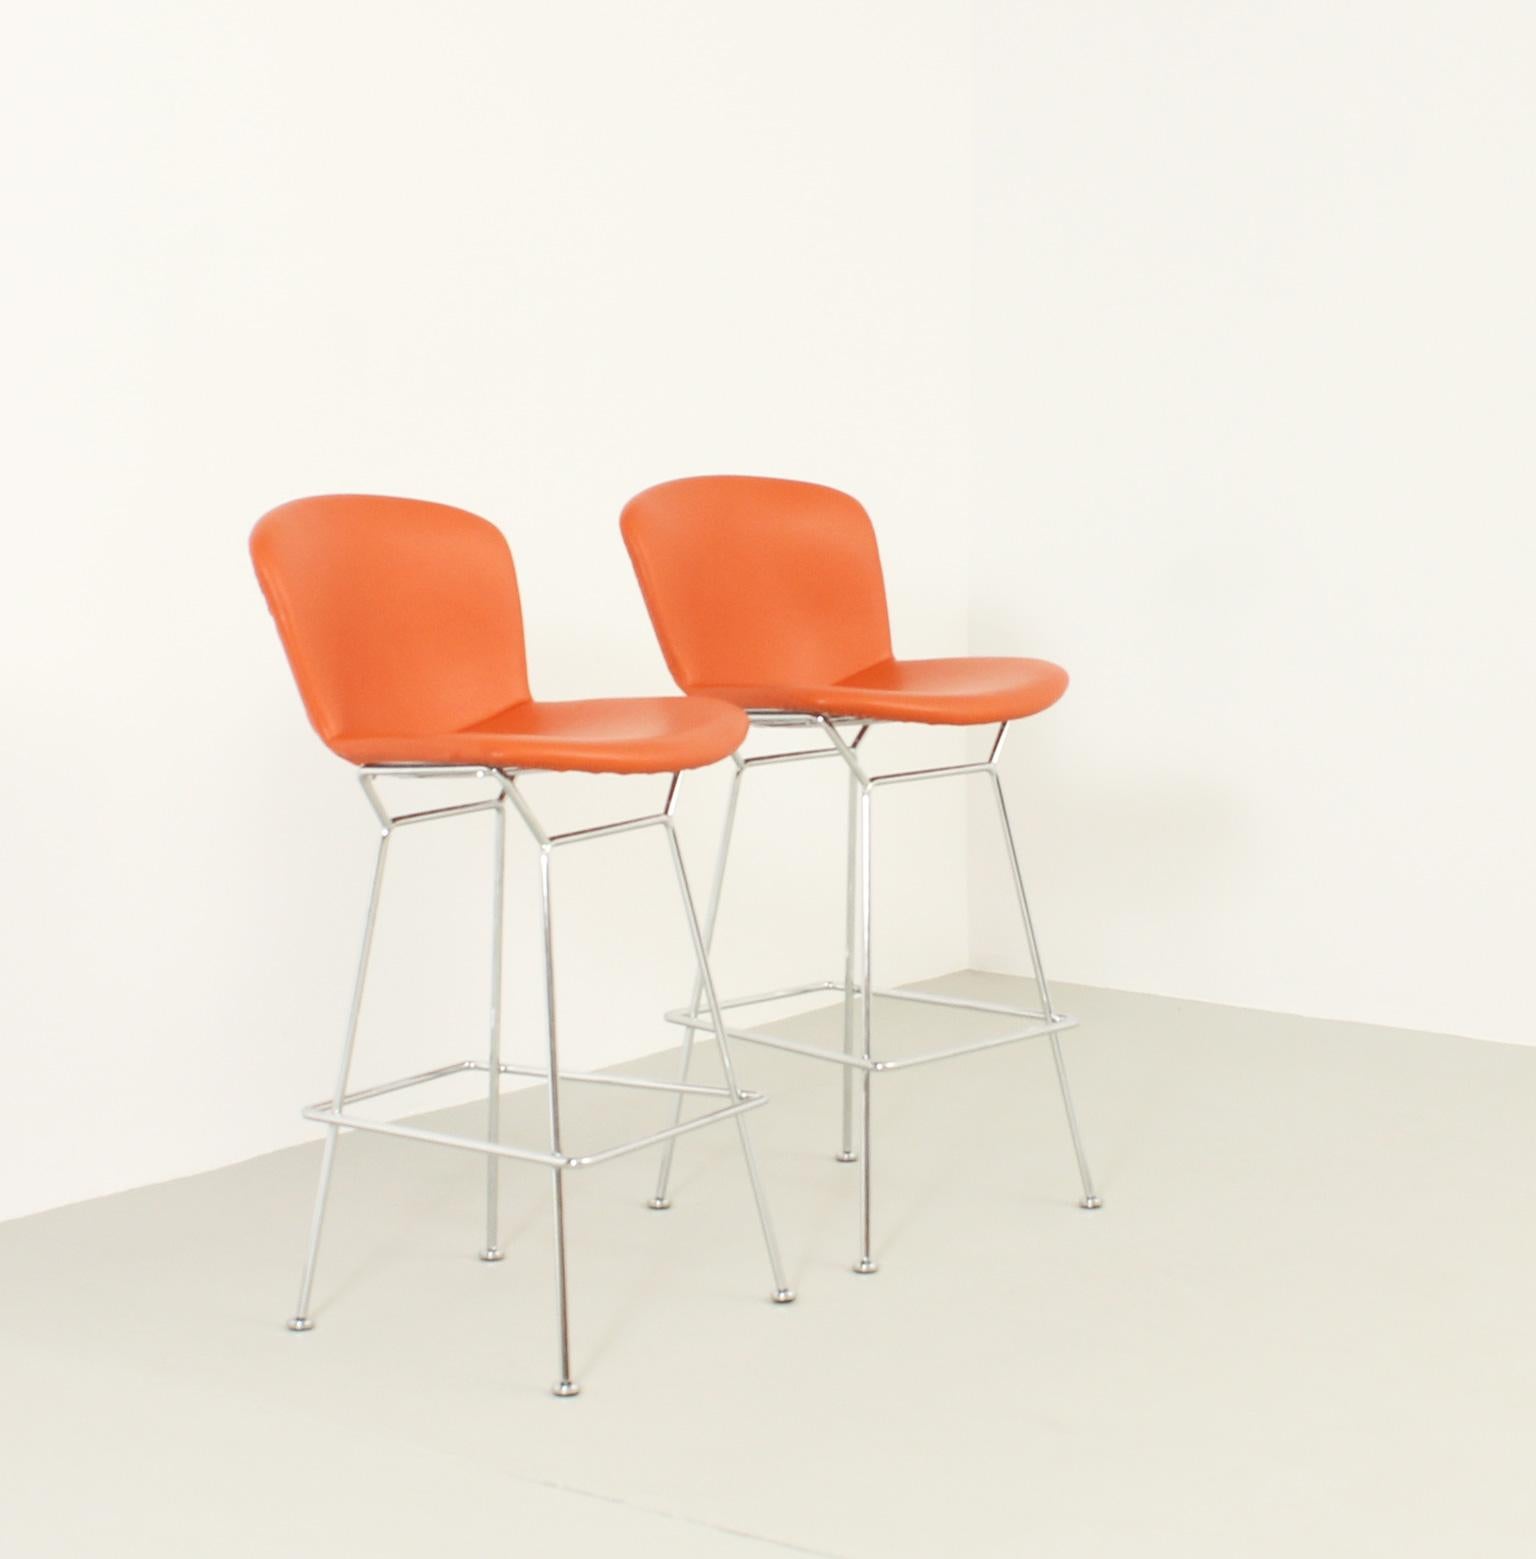 American Pair of Bar Stools by Harry Bertoia for Knoll